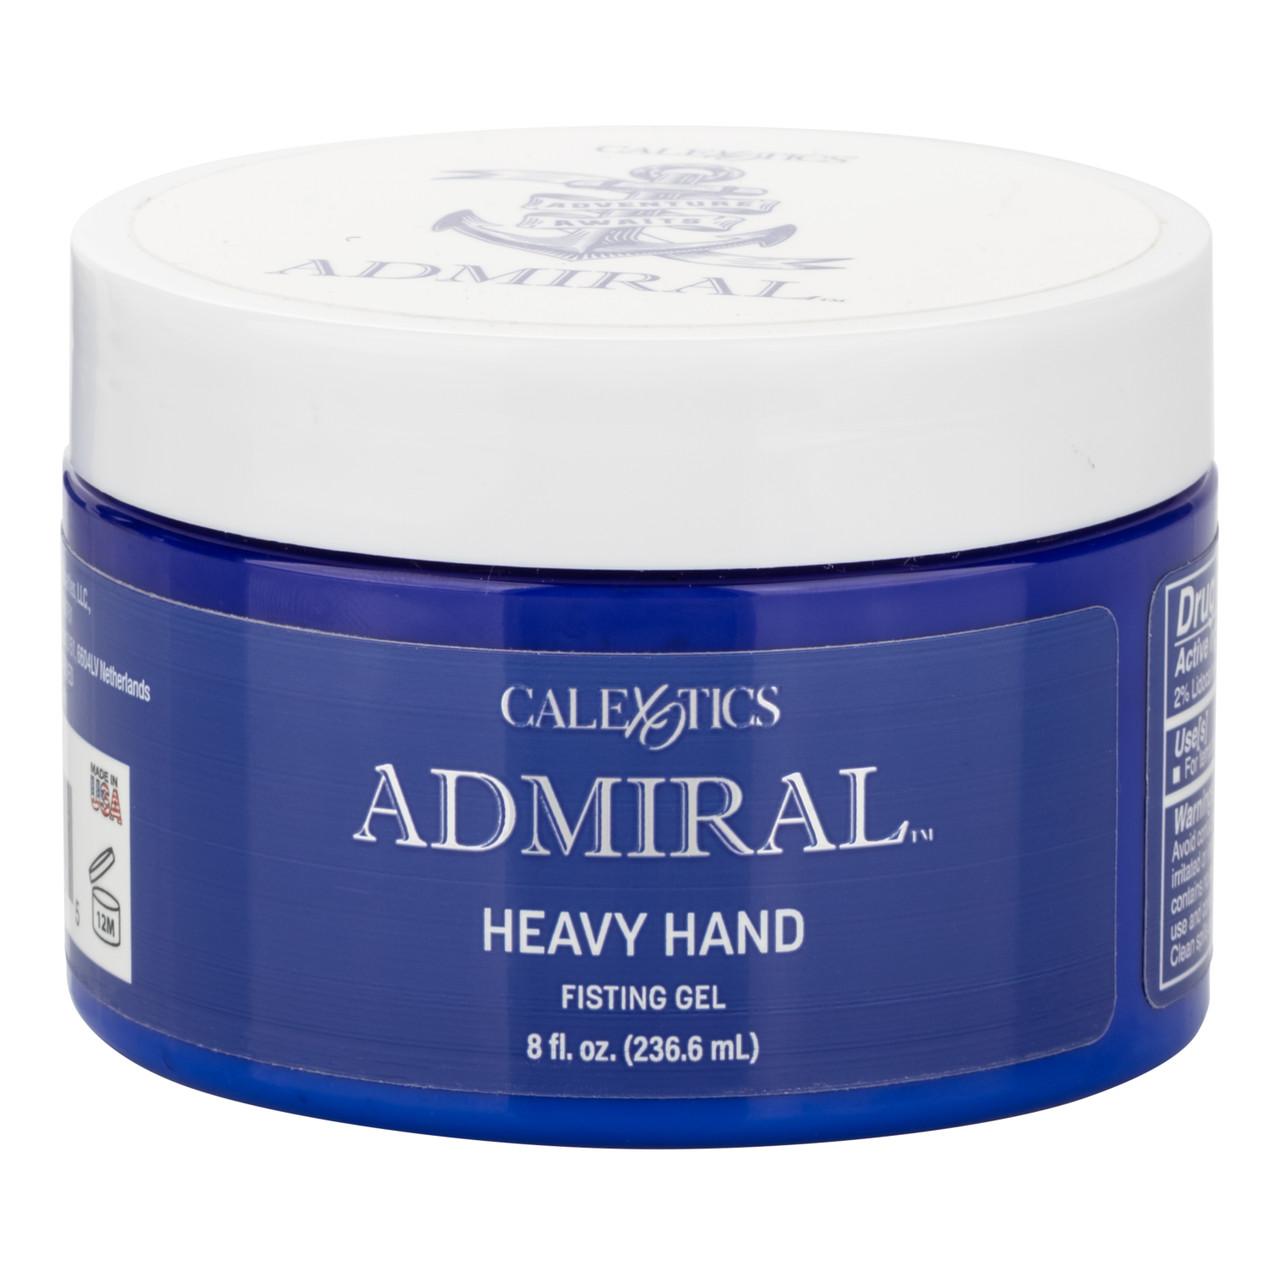 ADMIRAL HEAVY HAND FISTING GEL 8OZ JAR - Click Image to Close